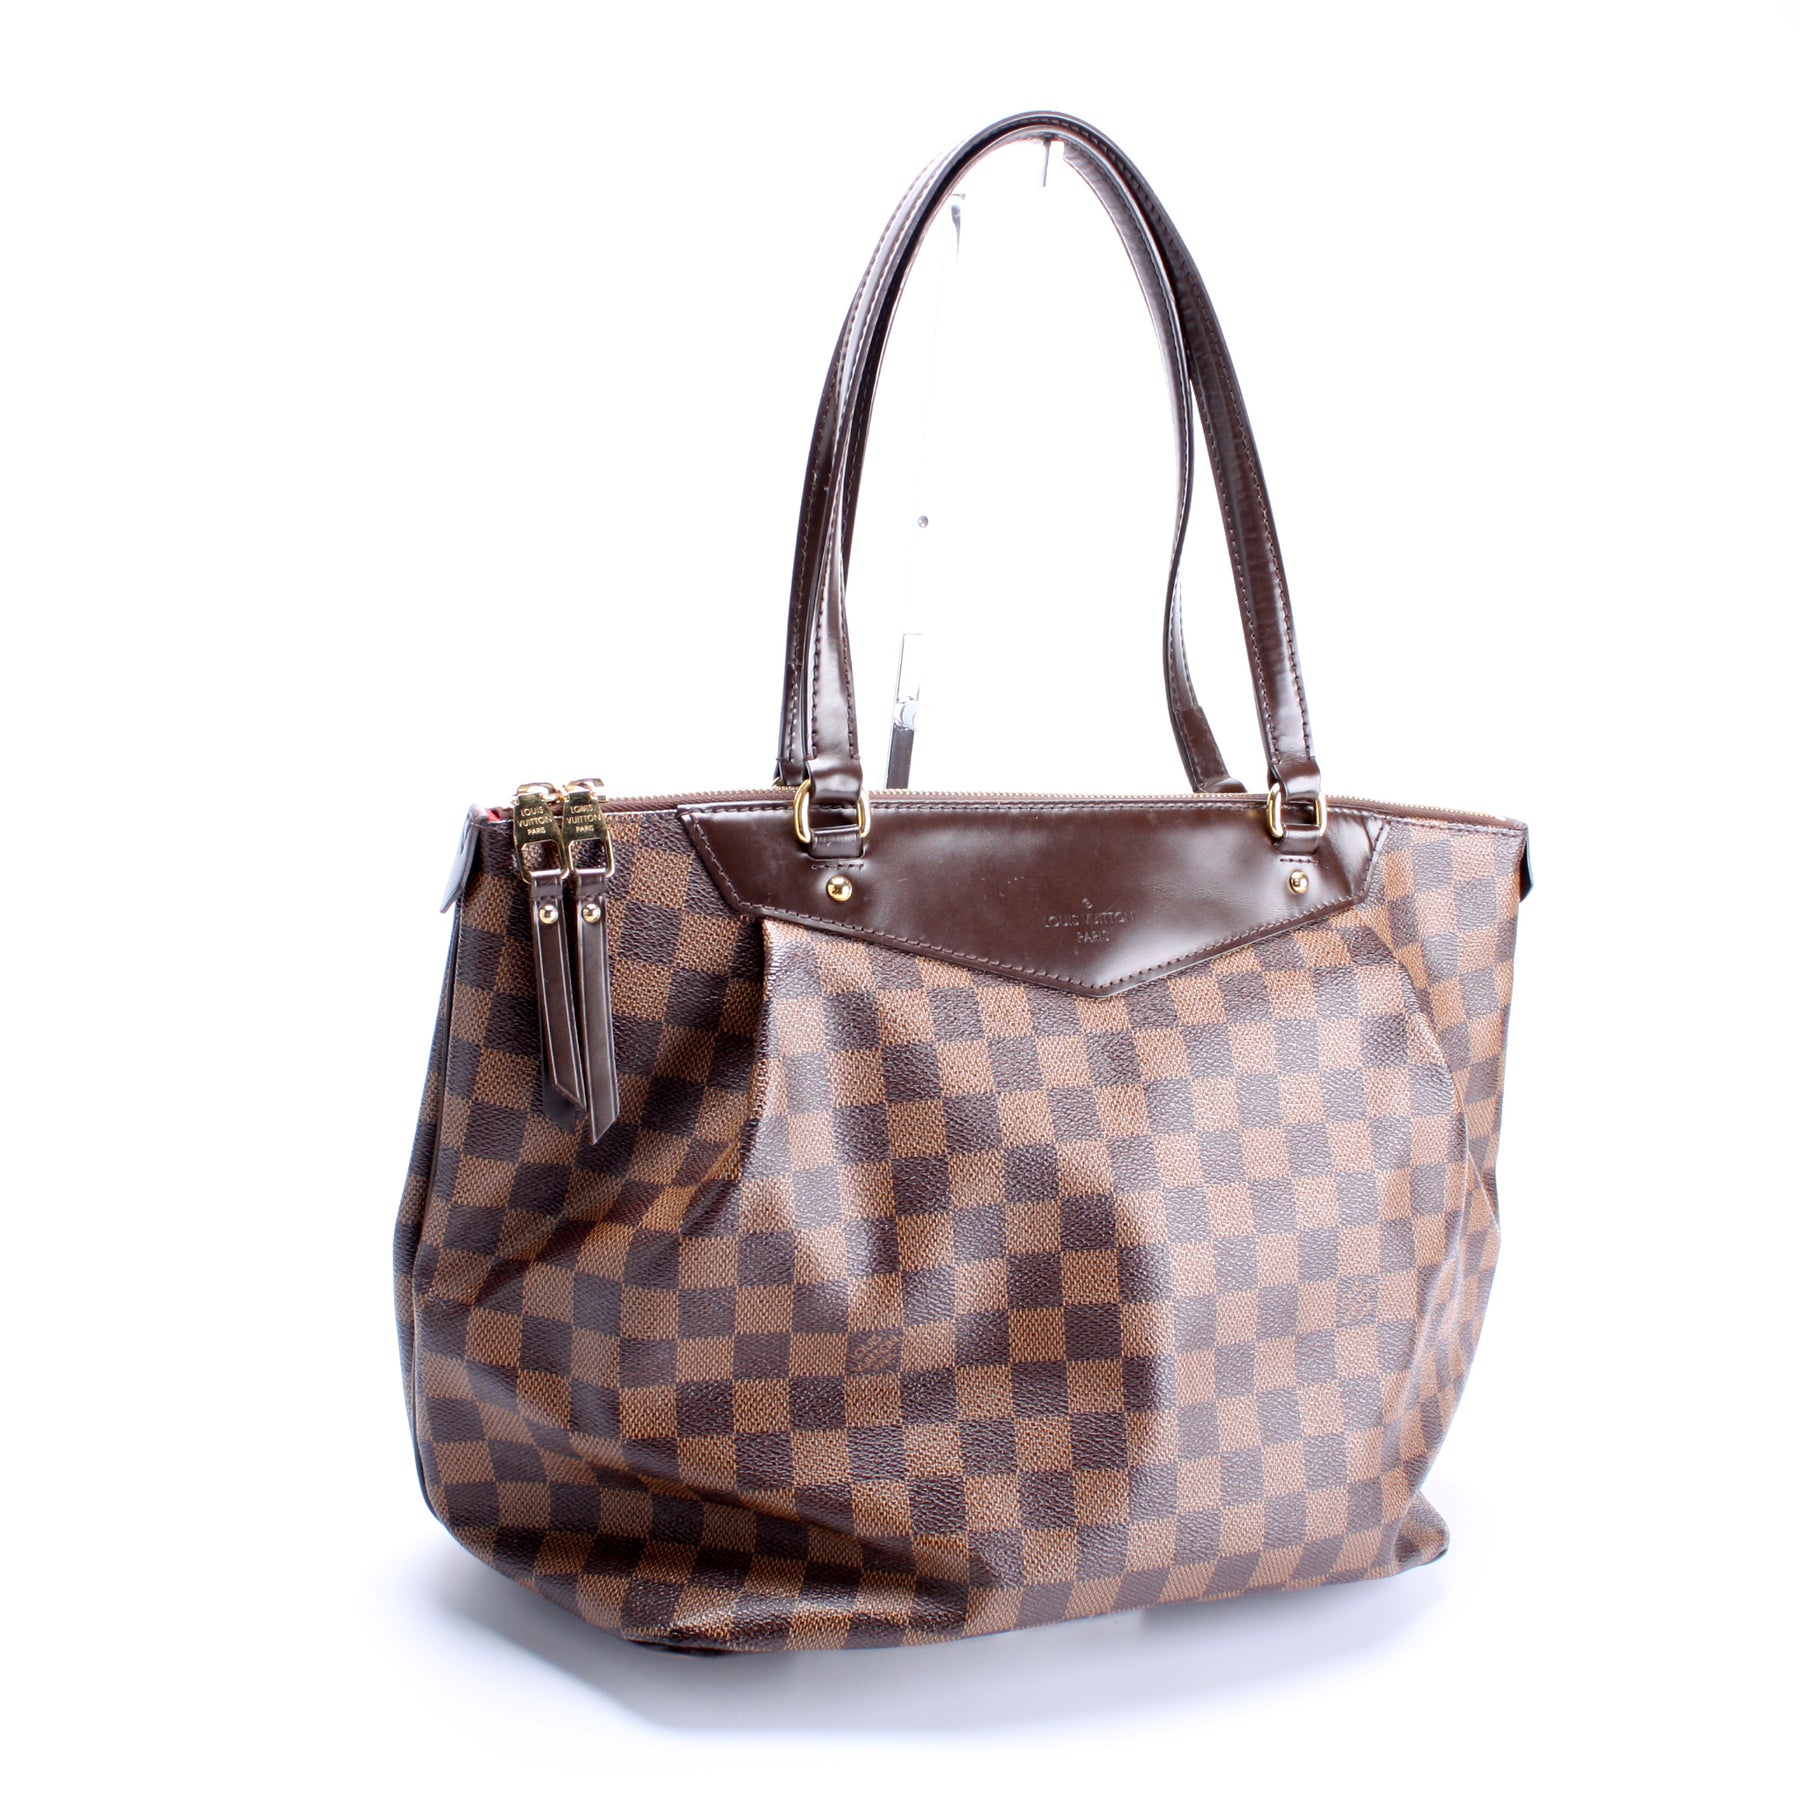 Westminster PM Damier Top handle bag in Coated canvas, Gold Hardware